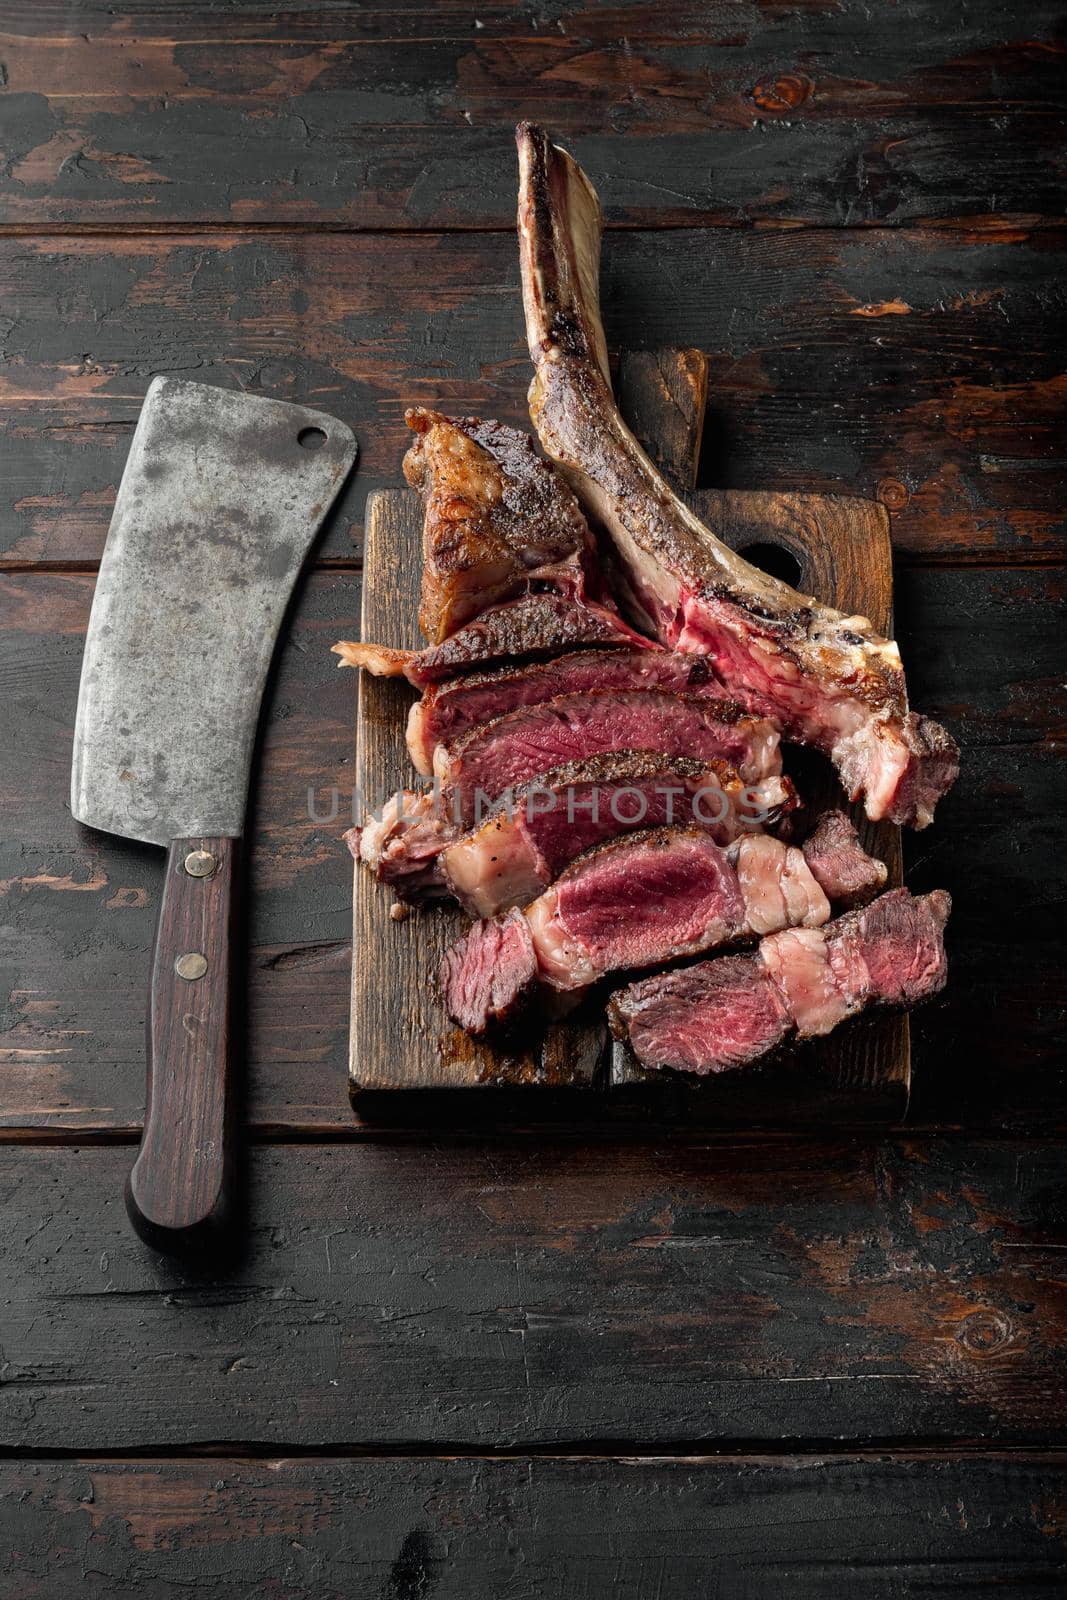 Sliced medium rare grilled Beef steak set, tomahawk cut, on wooden serving board, on old dark wooden table background, with copy space for text